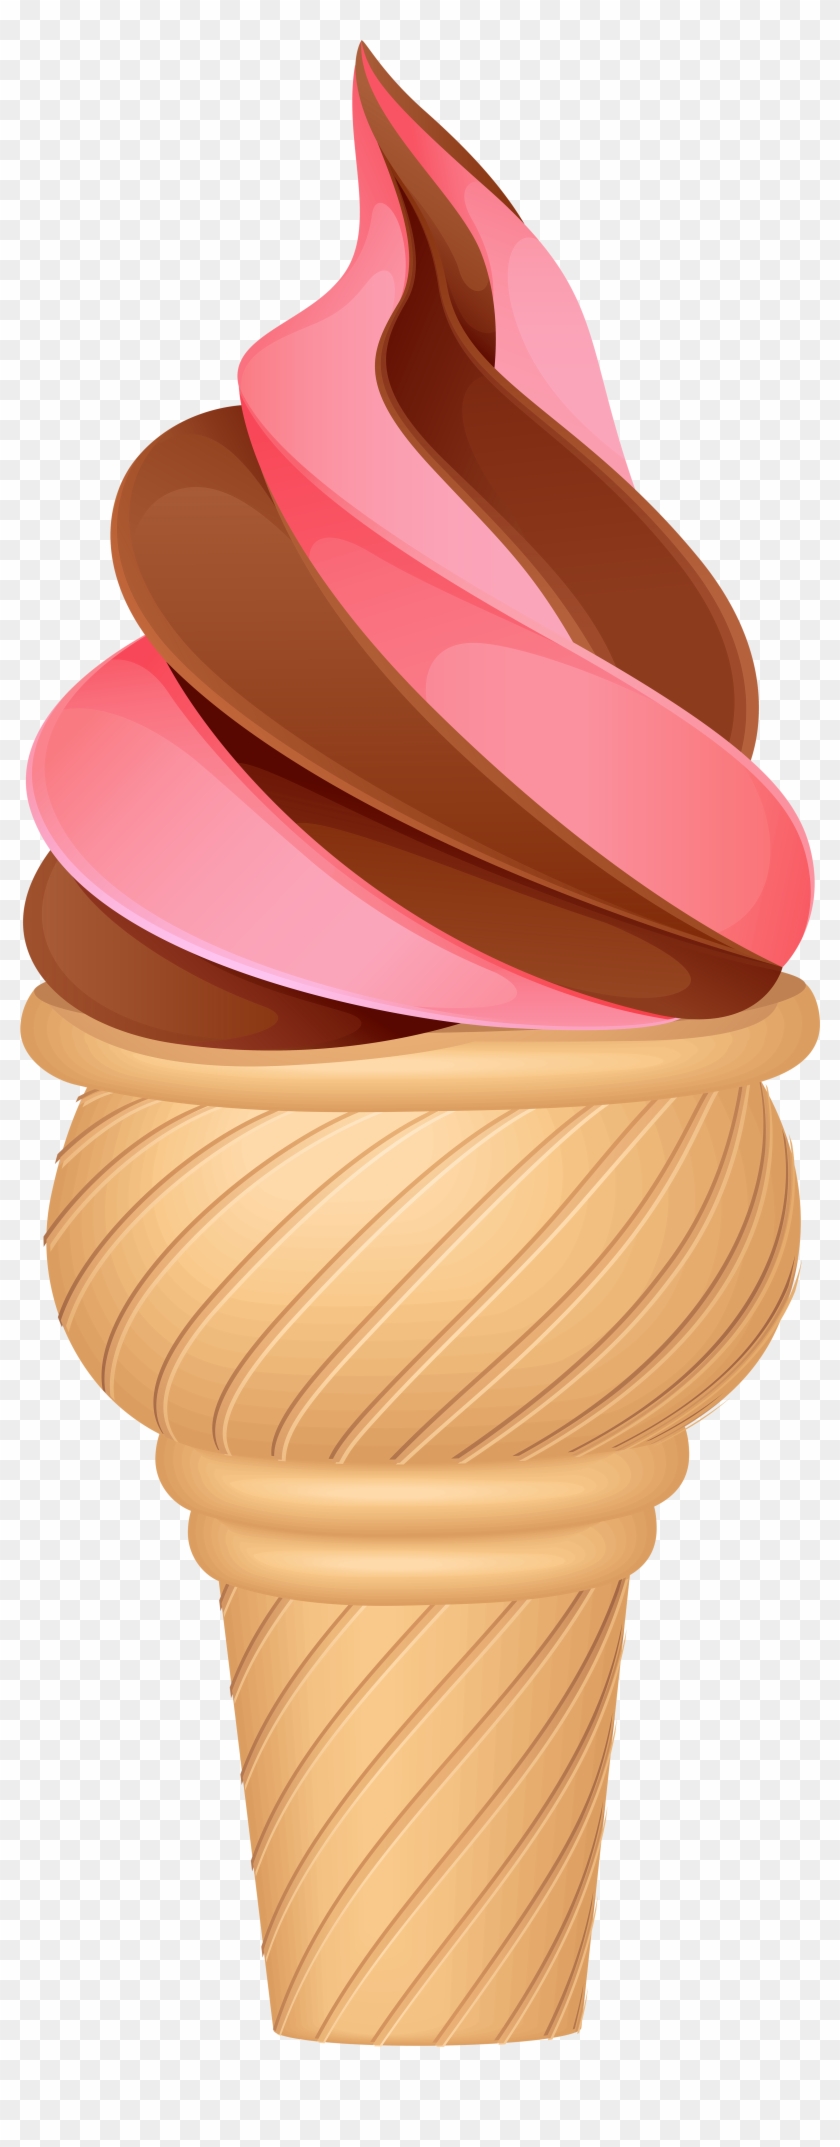 Ice Cream Png Clip Art - Soft Ice Cream Png High Resolution #558628